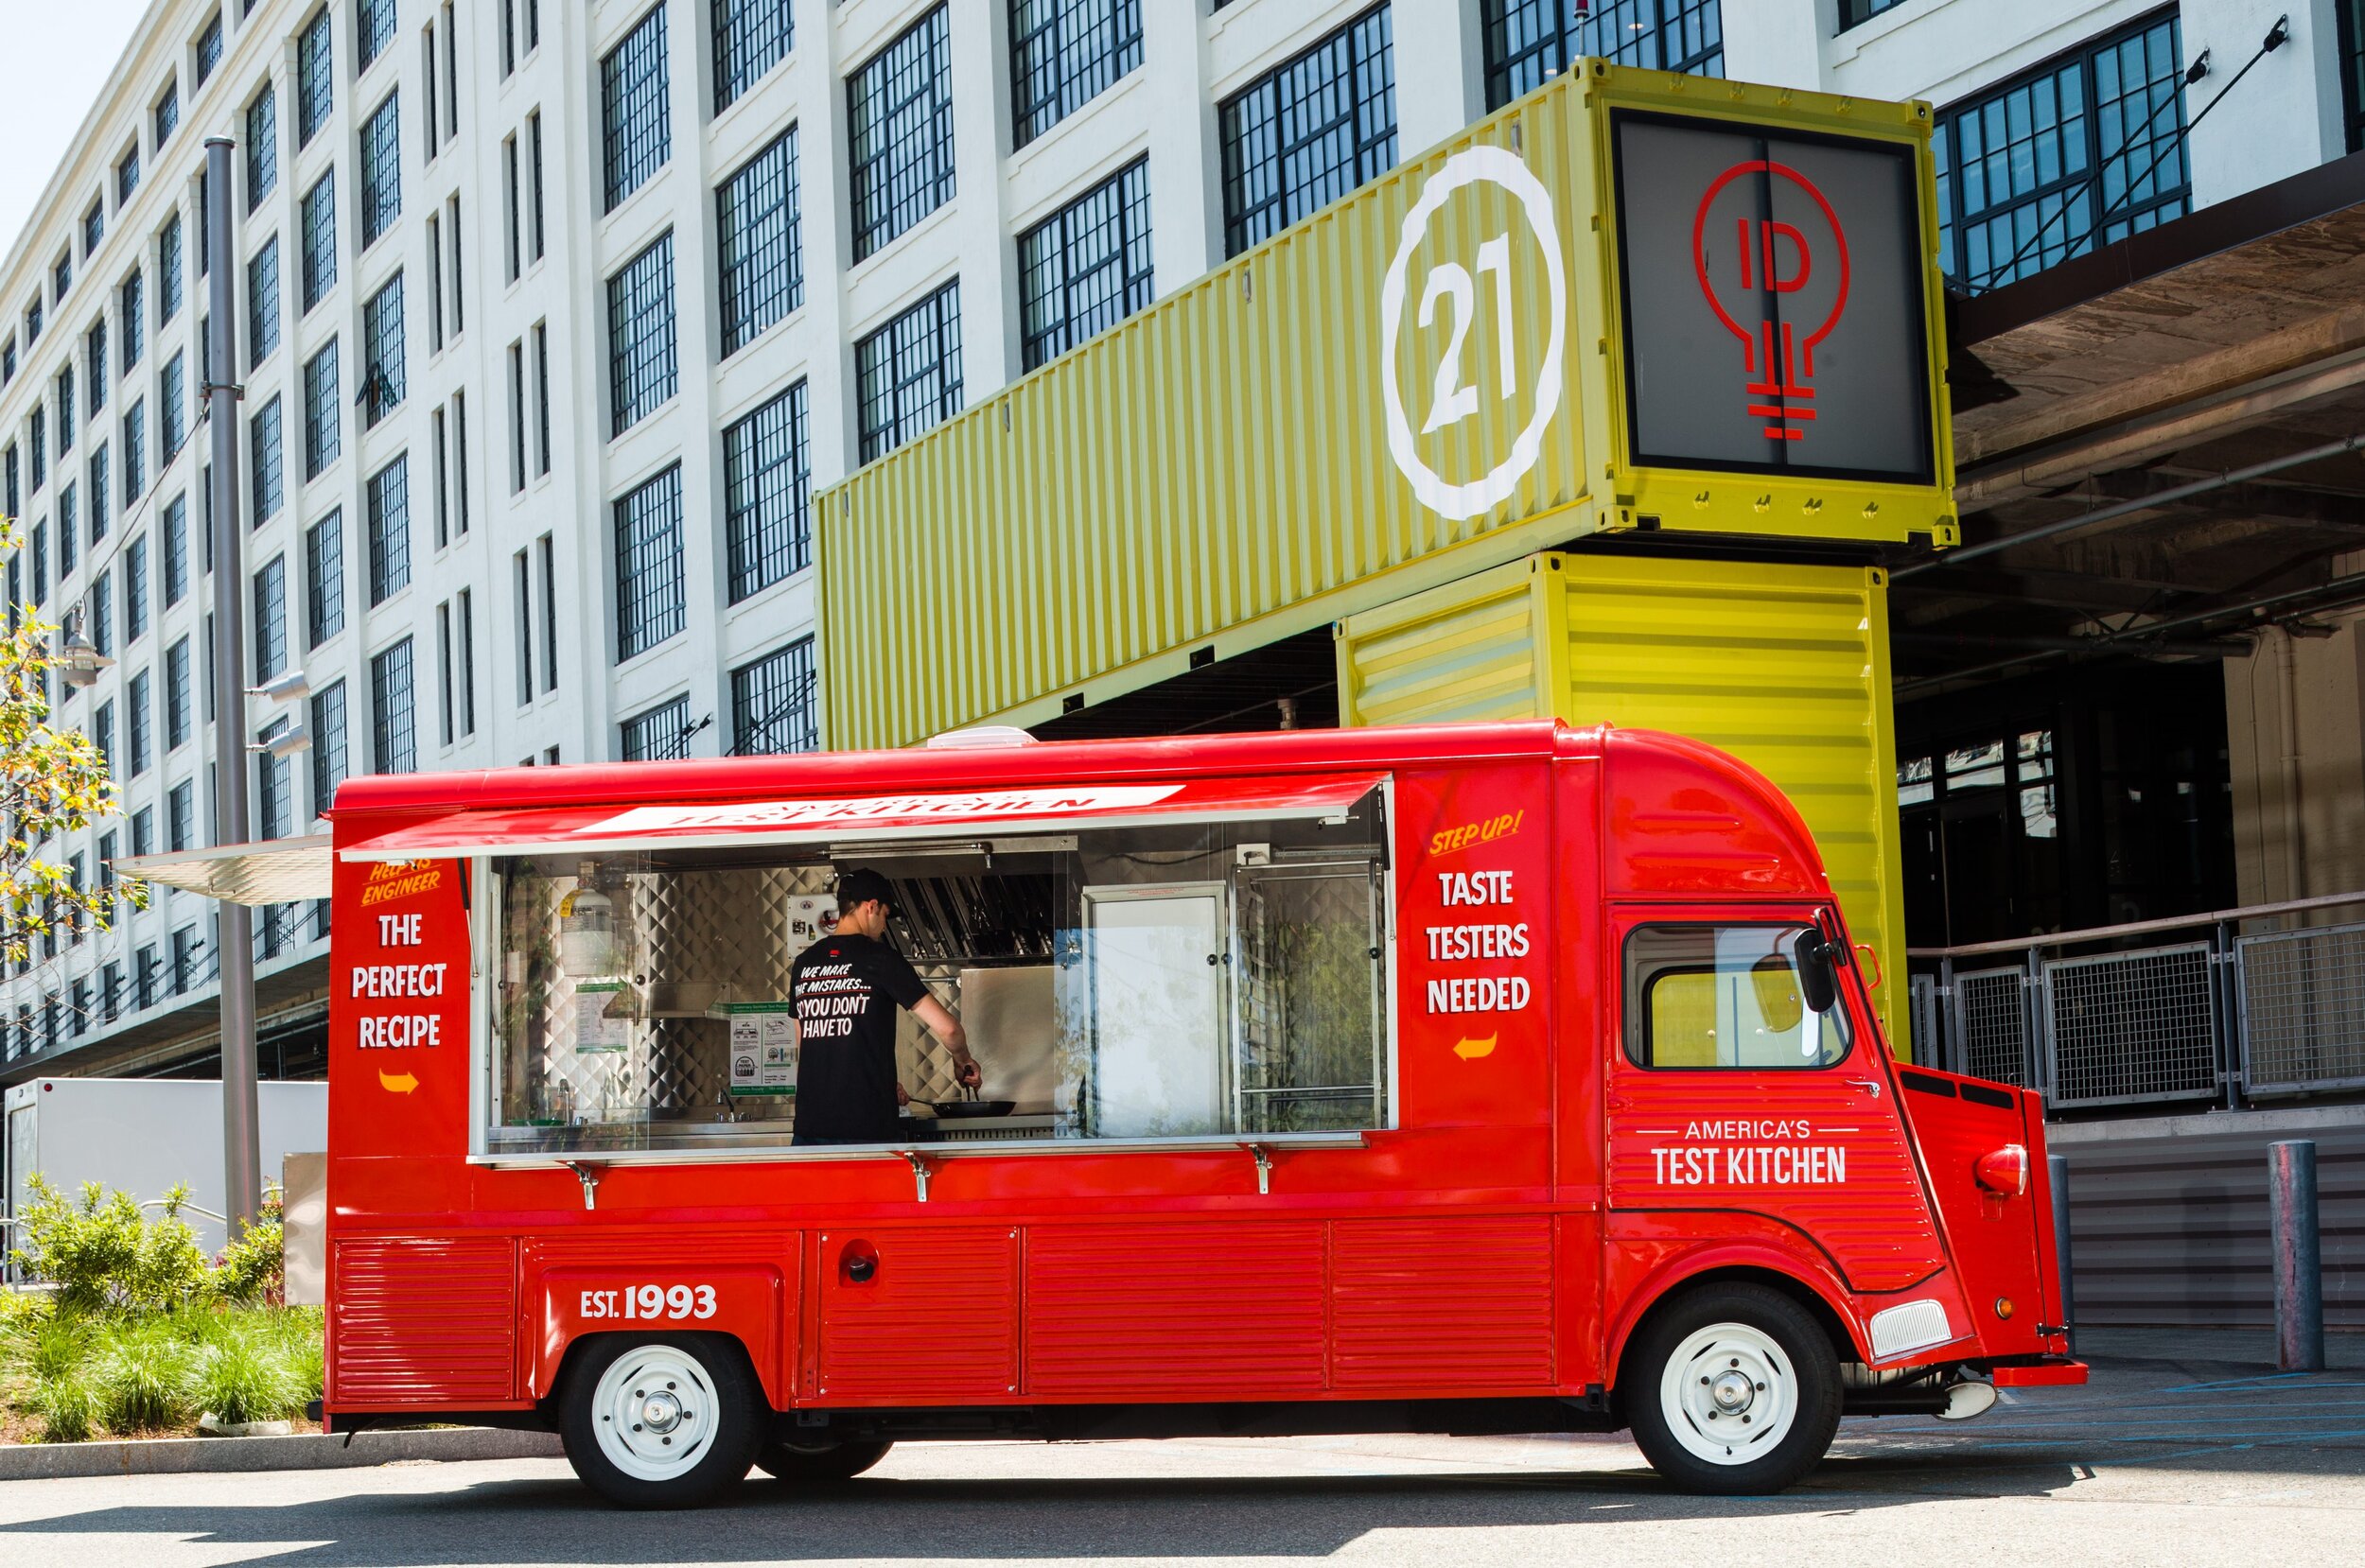 America's Test Kitchen food truck parked in front of building